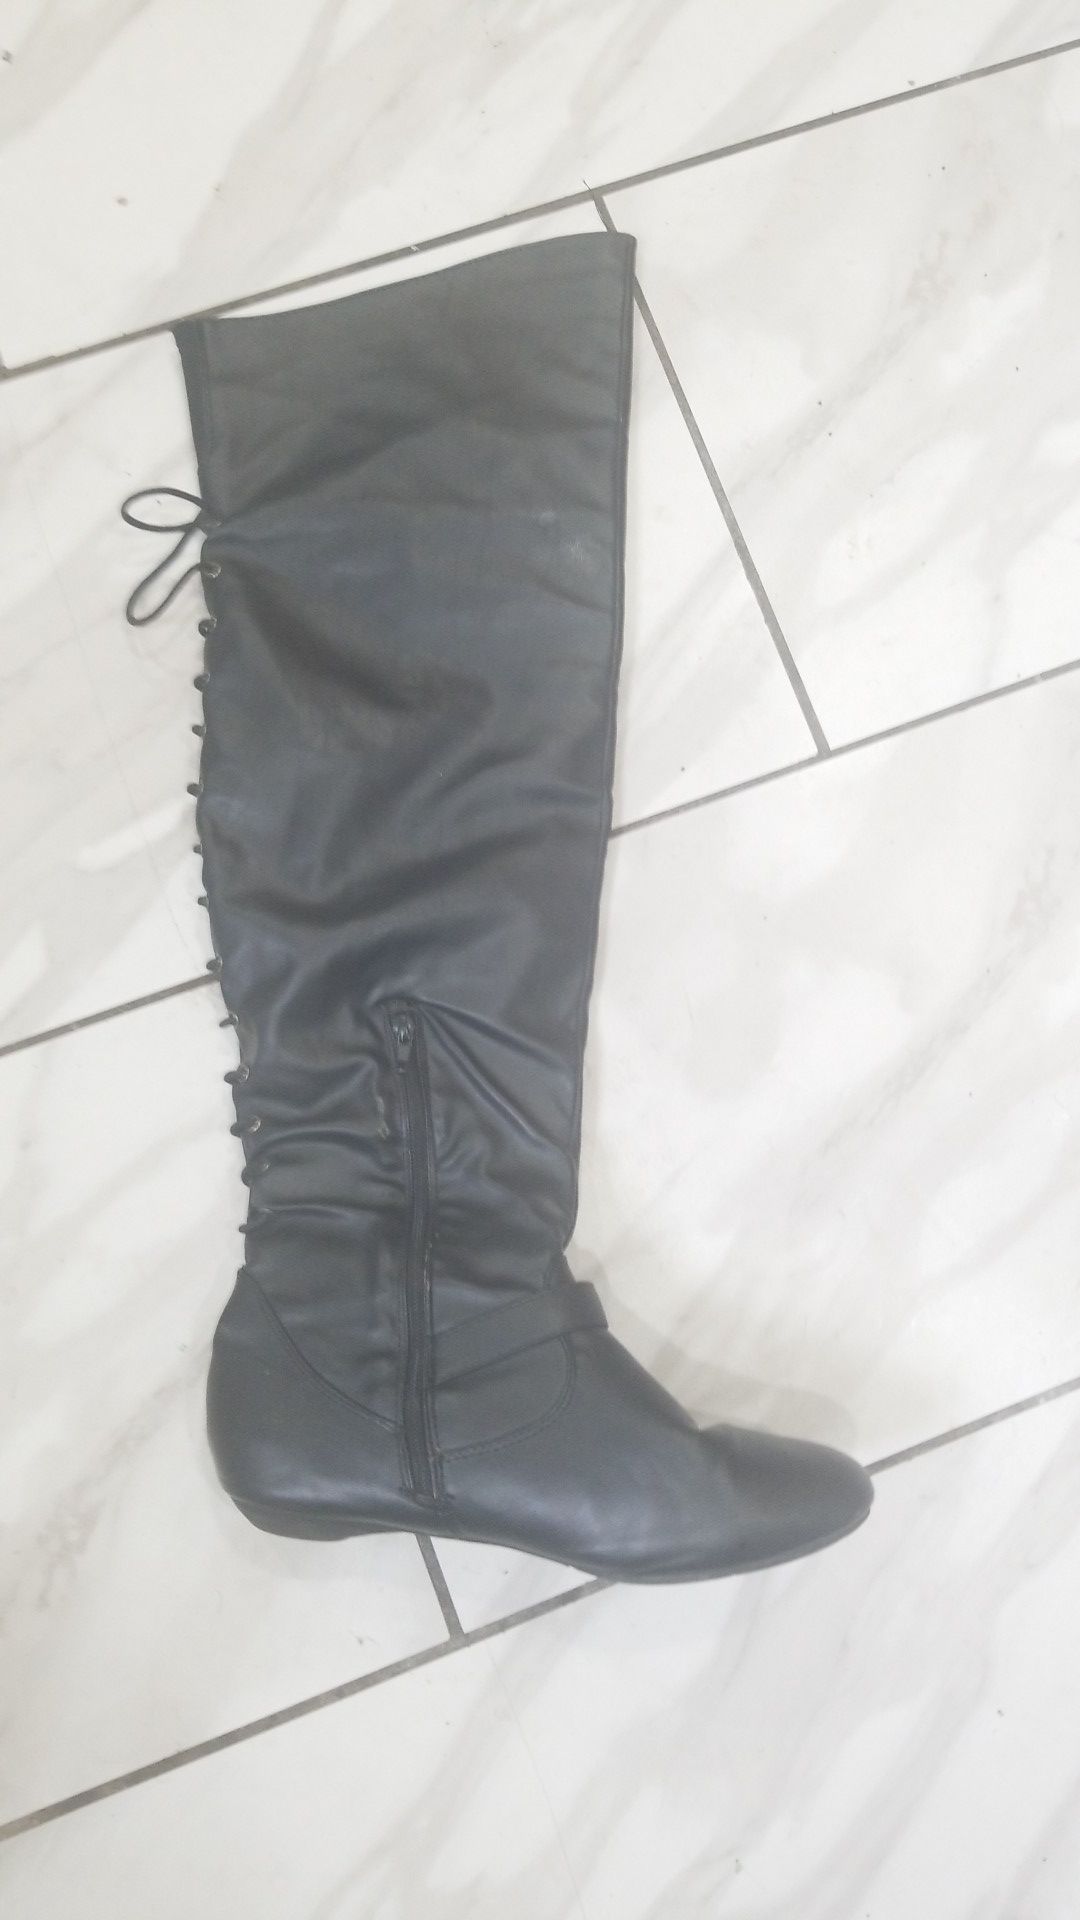 $$10 thigh high boots size 9 ,used good condition